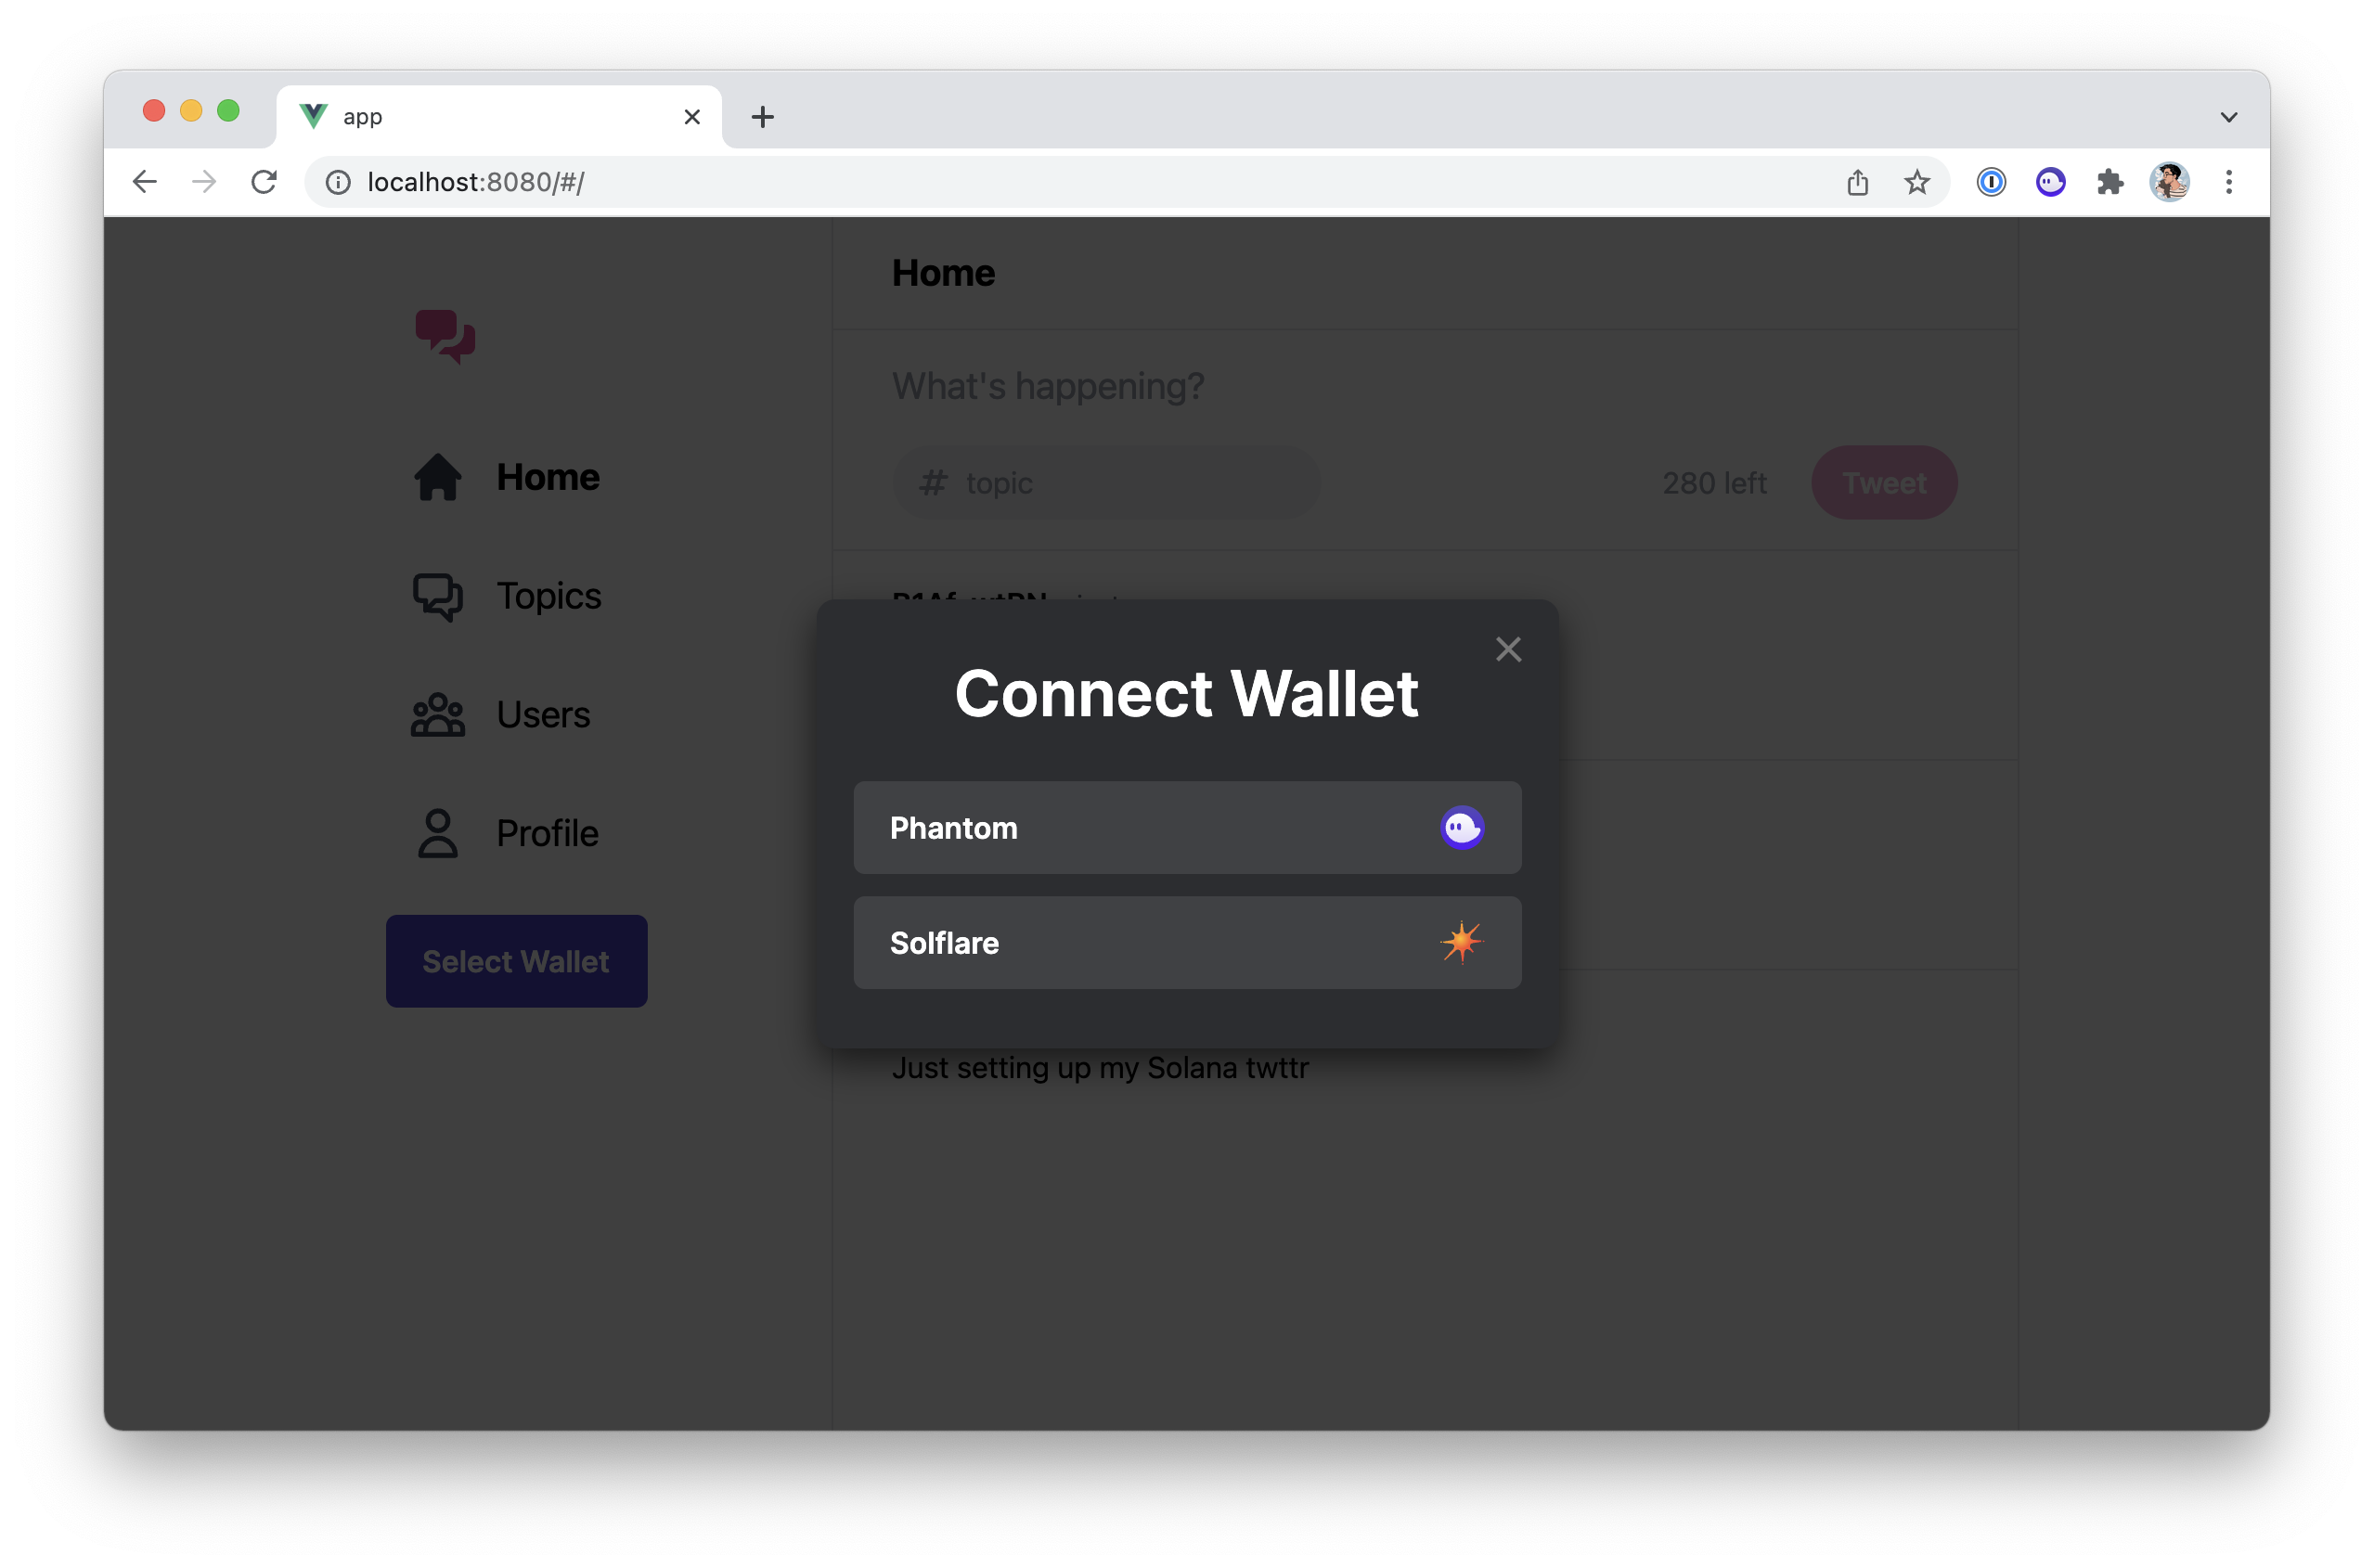 Screenshot of the application with the &quot;Connect Wallet&quot; modal opened.